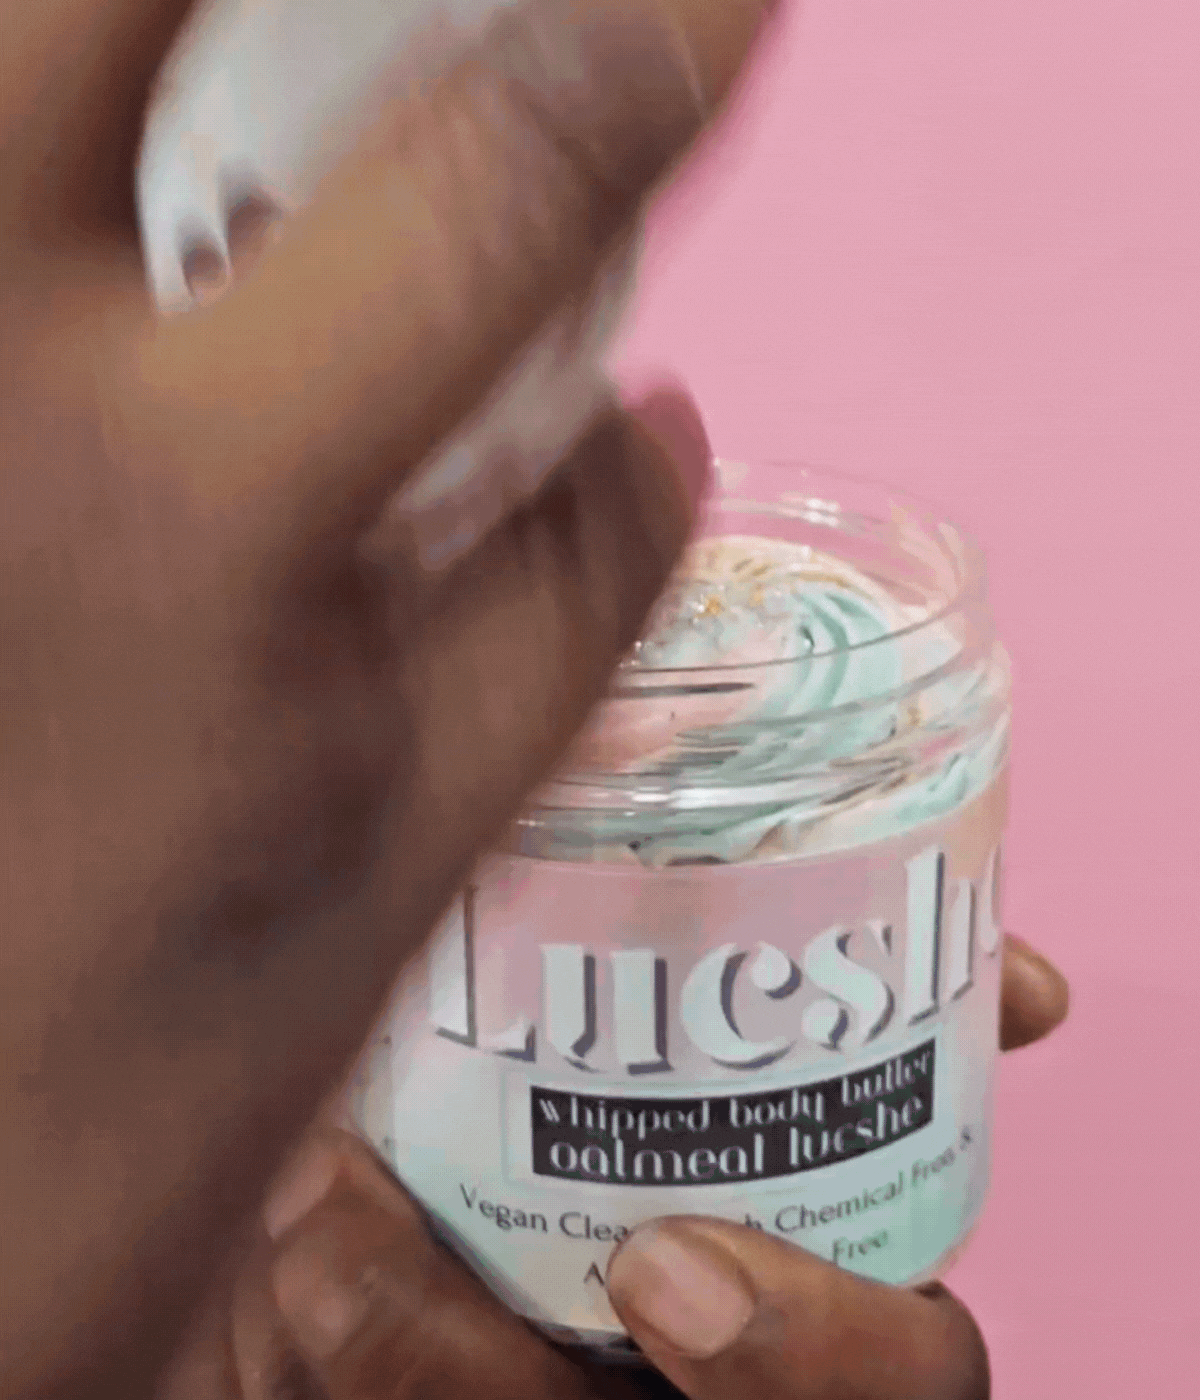 How To Use Lusche Bodybutter